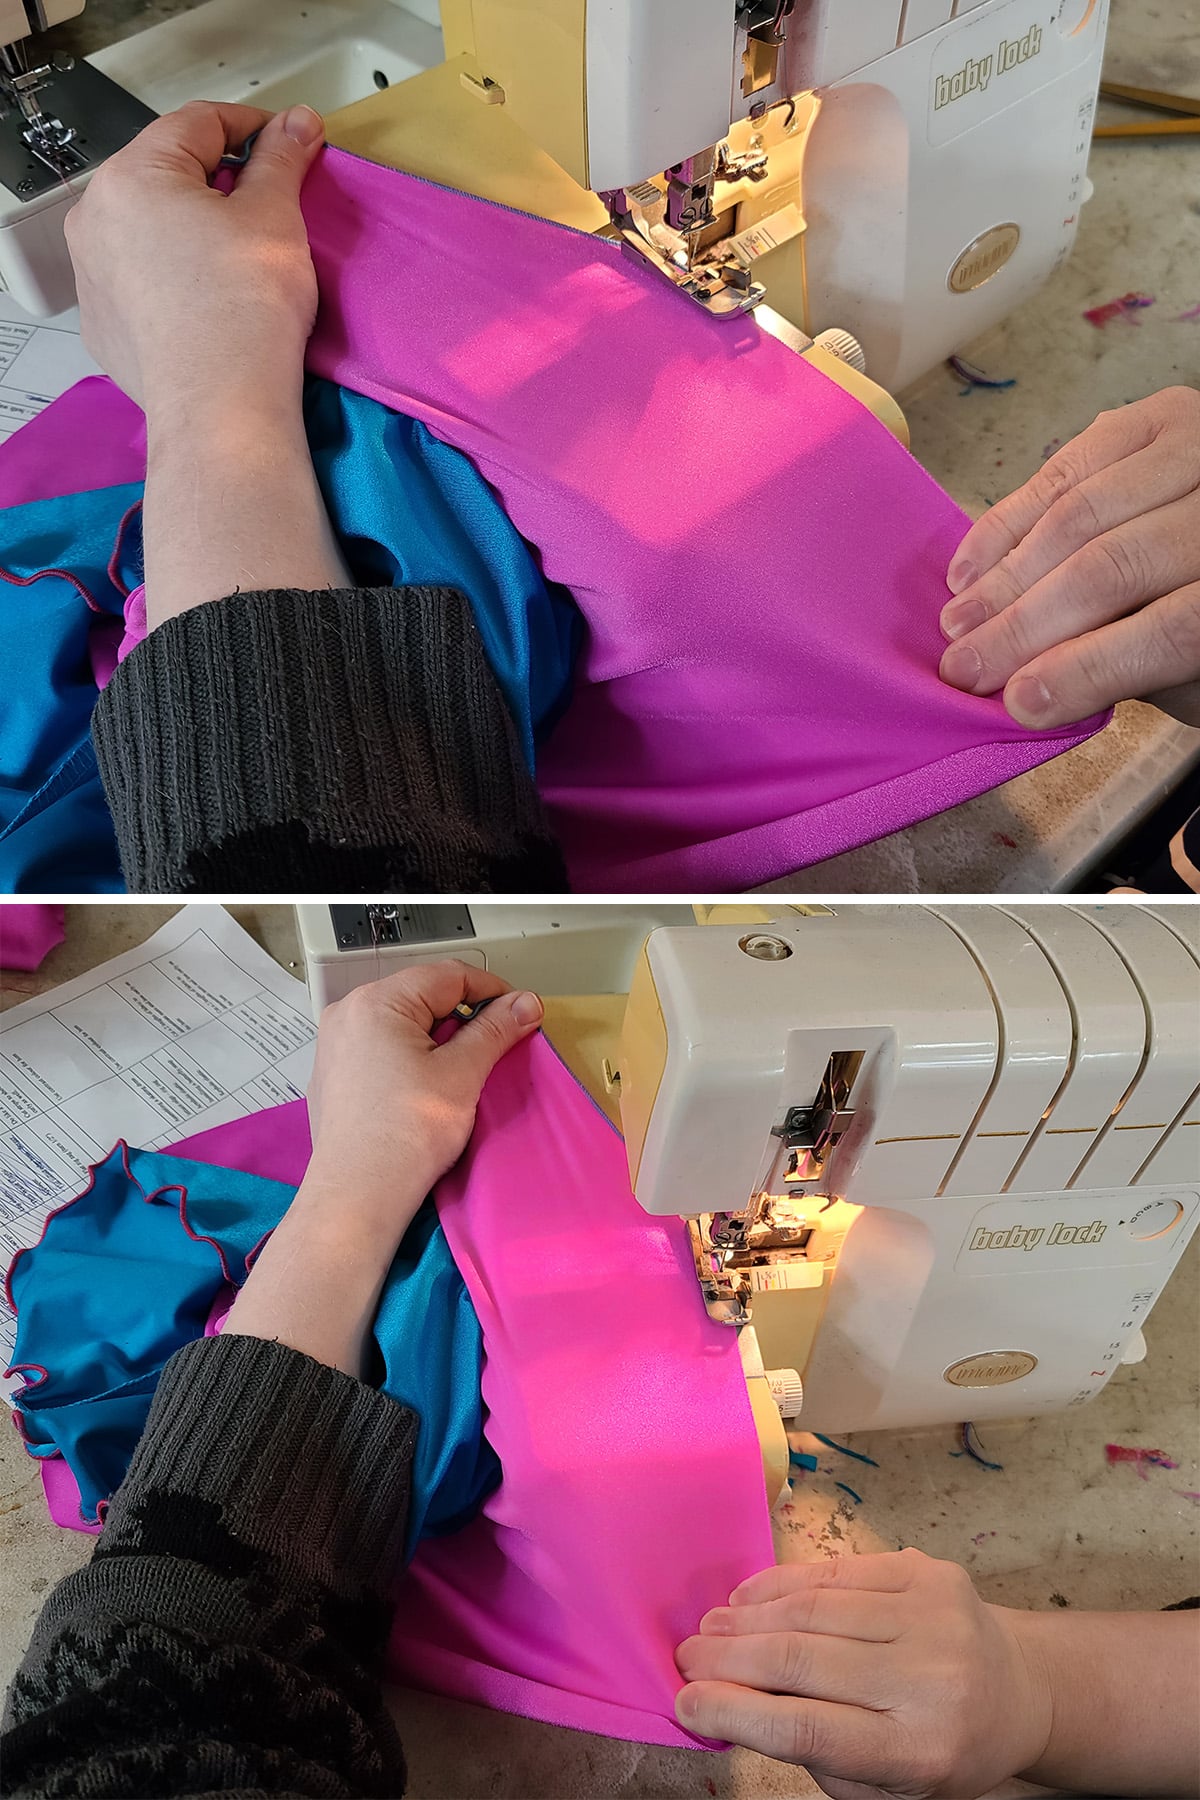 A two part image showing a strip of pink spandex being fed into a serger.